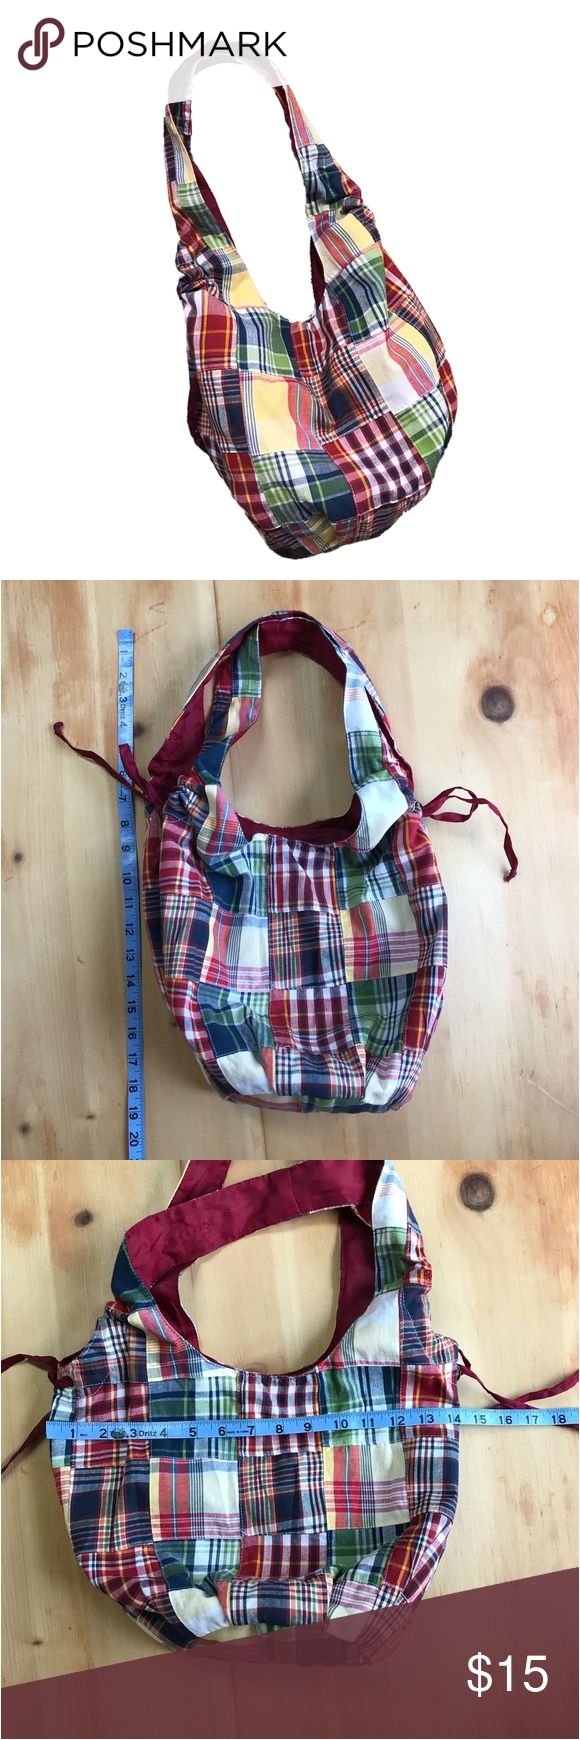 nwot madras plaid patchwork hobo purse tote